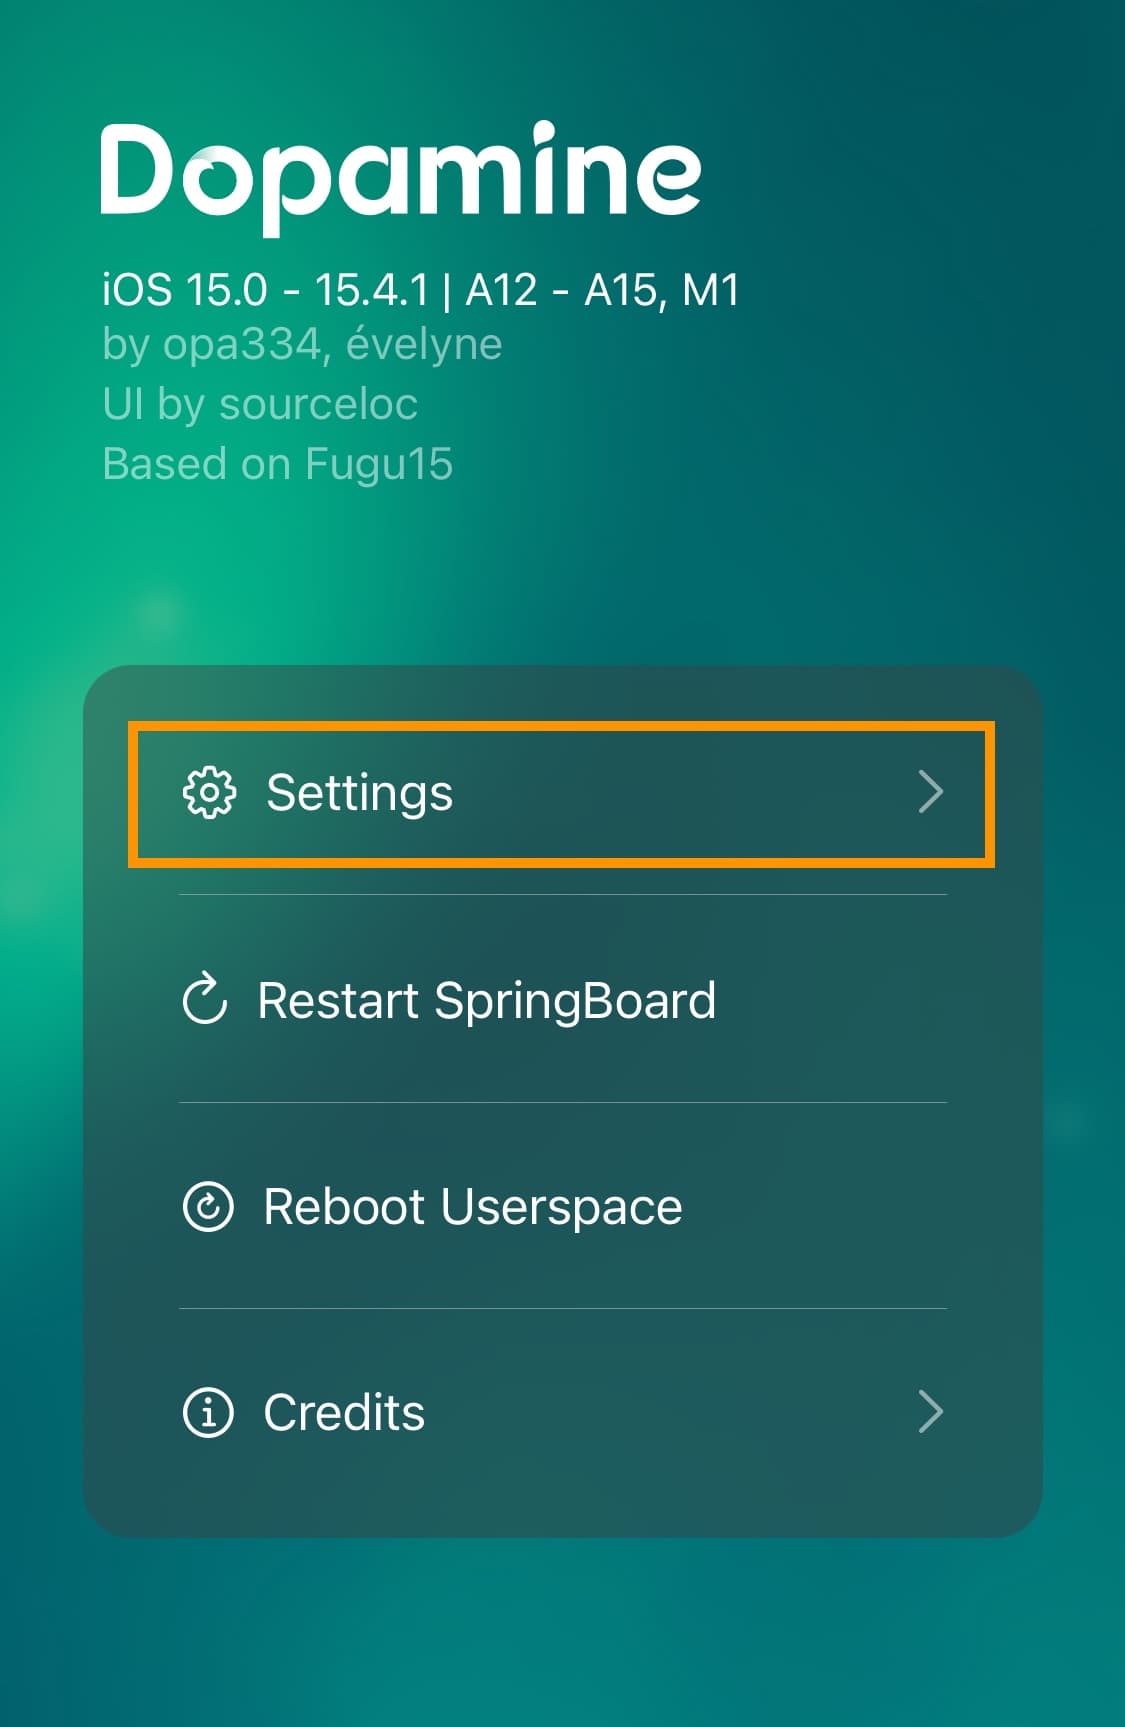 Tap on the Settings option.